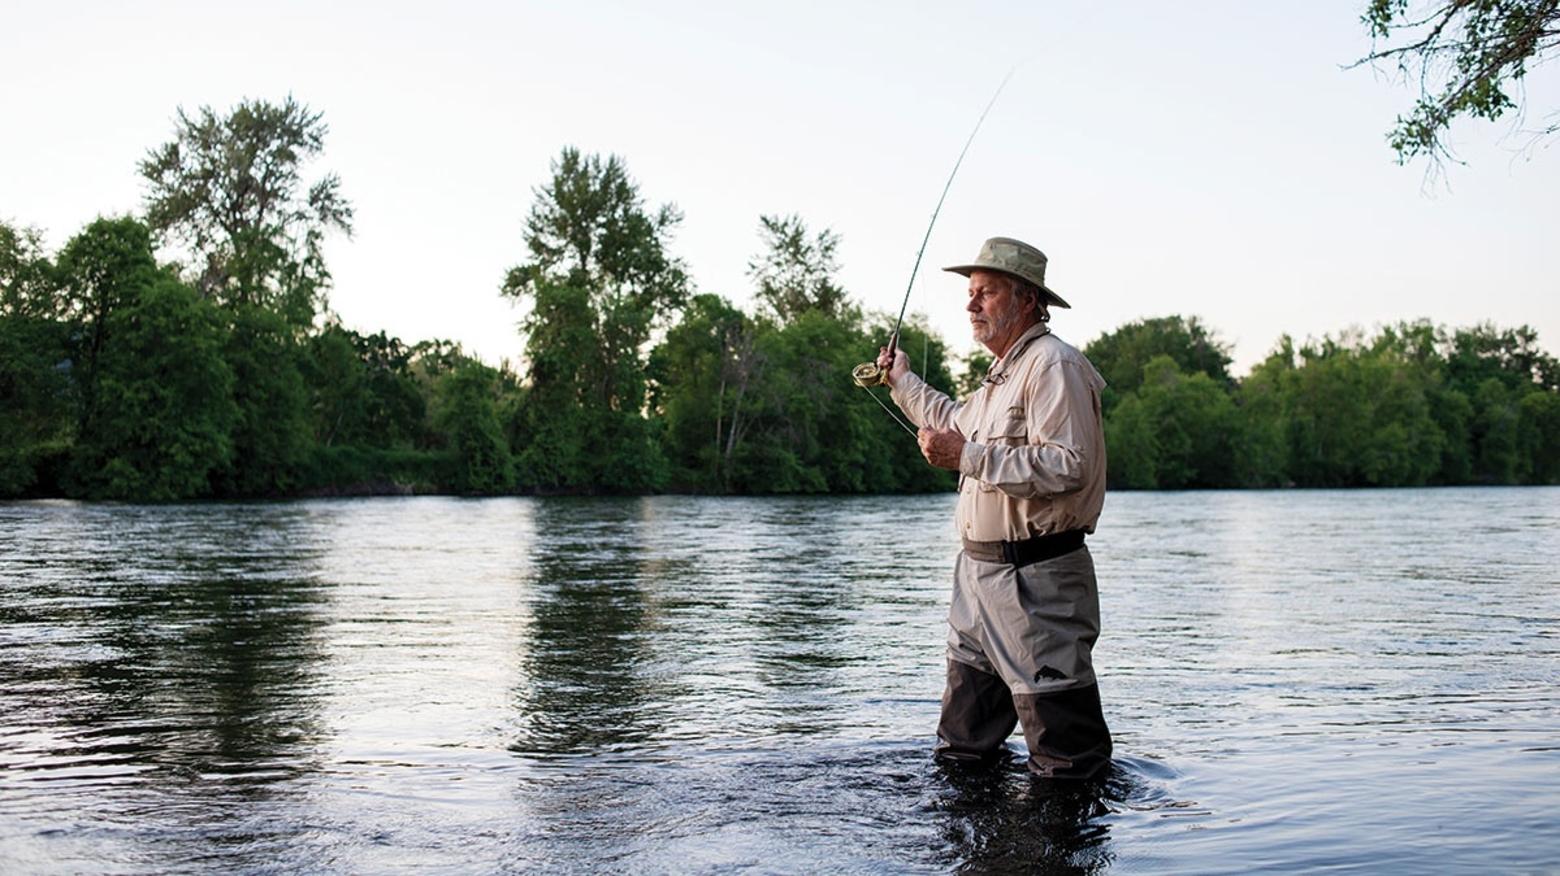 An avid fly fisherman, Finley grew up in Medford, Oregon, fishing the Rogue River. He attended Southern Oregon University where he studied biology and planned to become a dentist. The universe had other plans, and Finley went on to serve multiple posts over 32 years for the Park Service. Photo courtesy Southern Oregon University